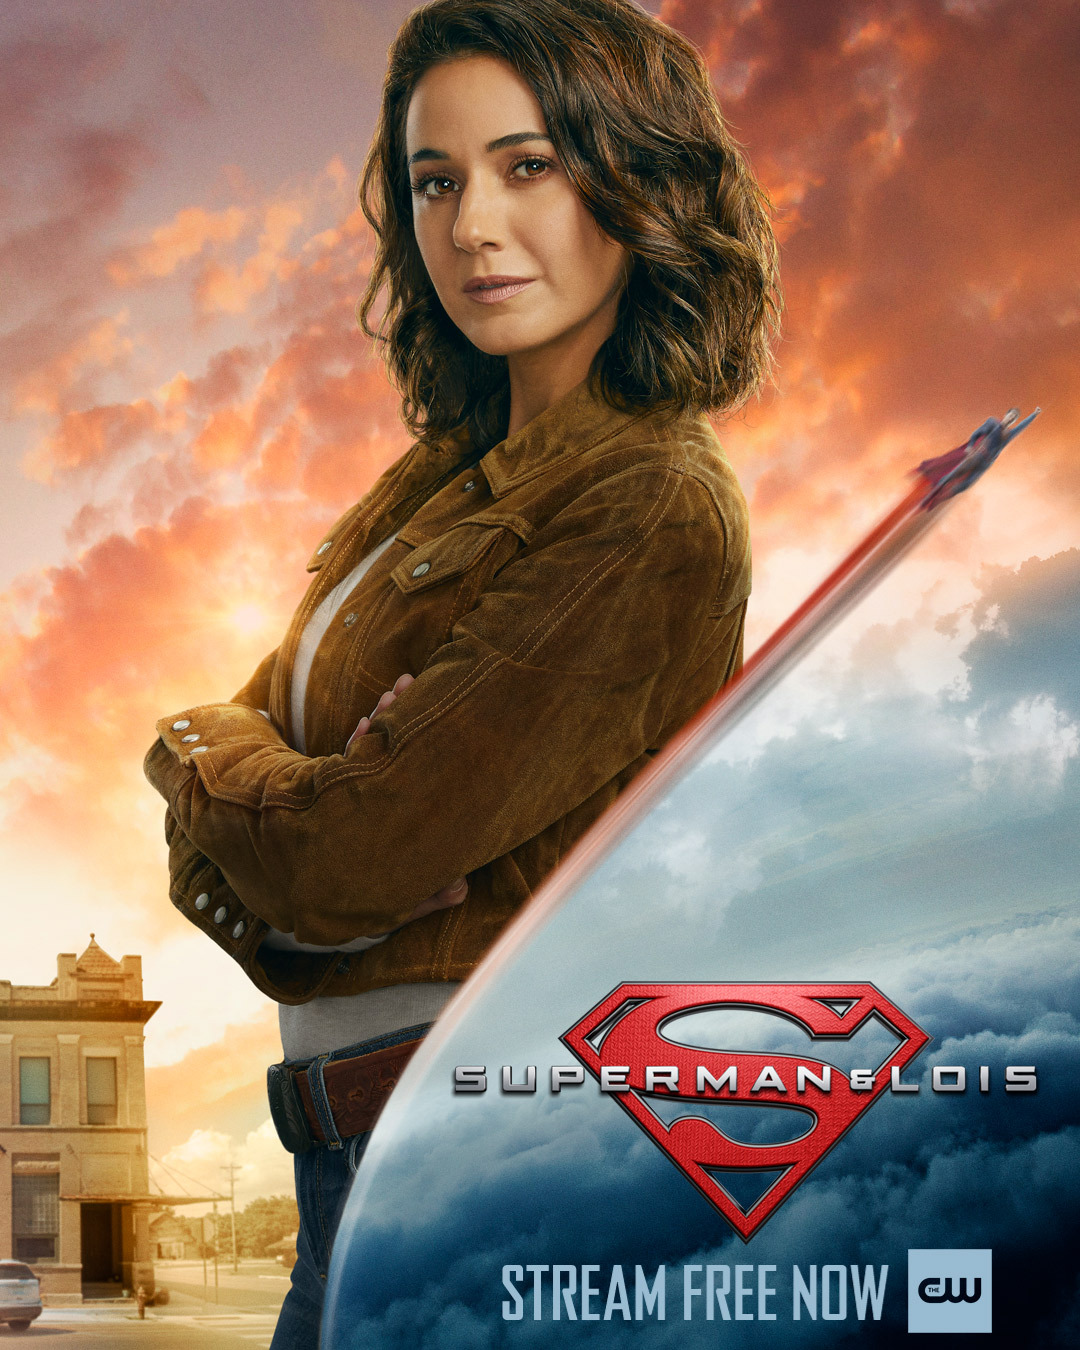 Extra Large TV Poster Image for Superman and Lois (#9 of 24)